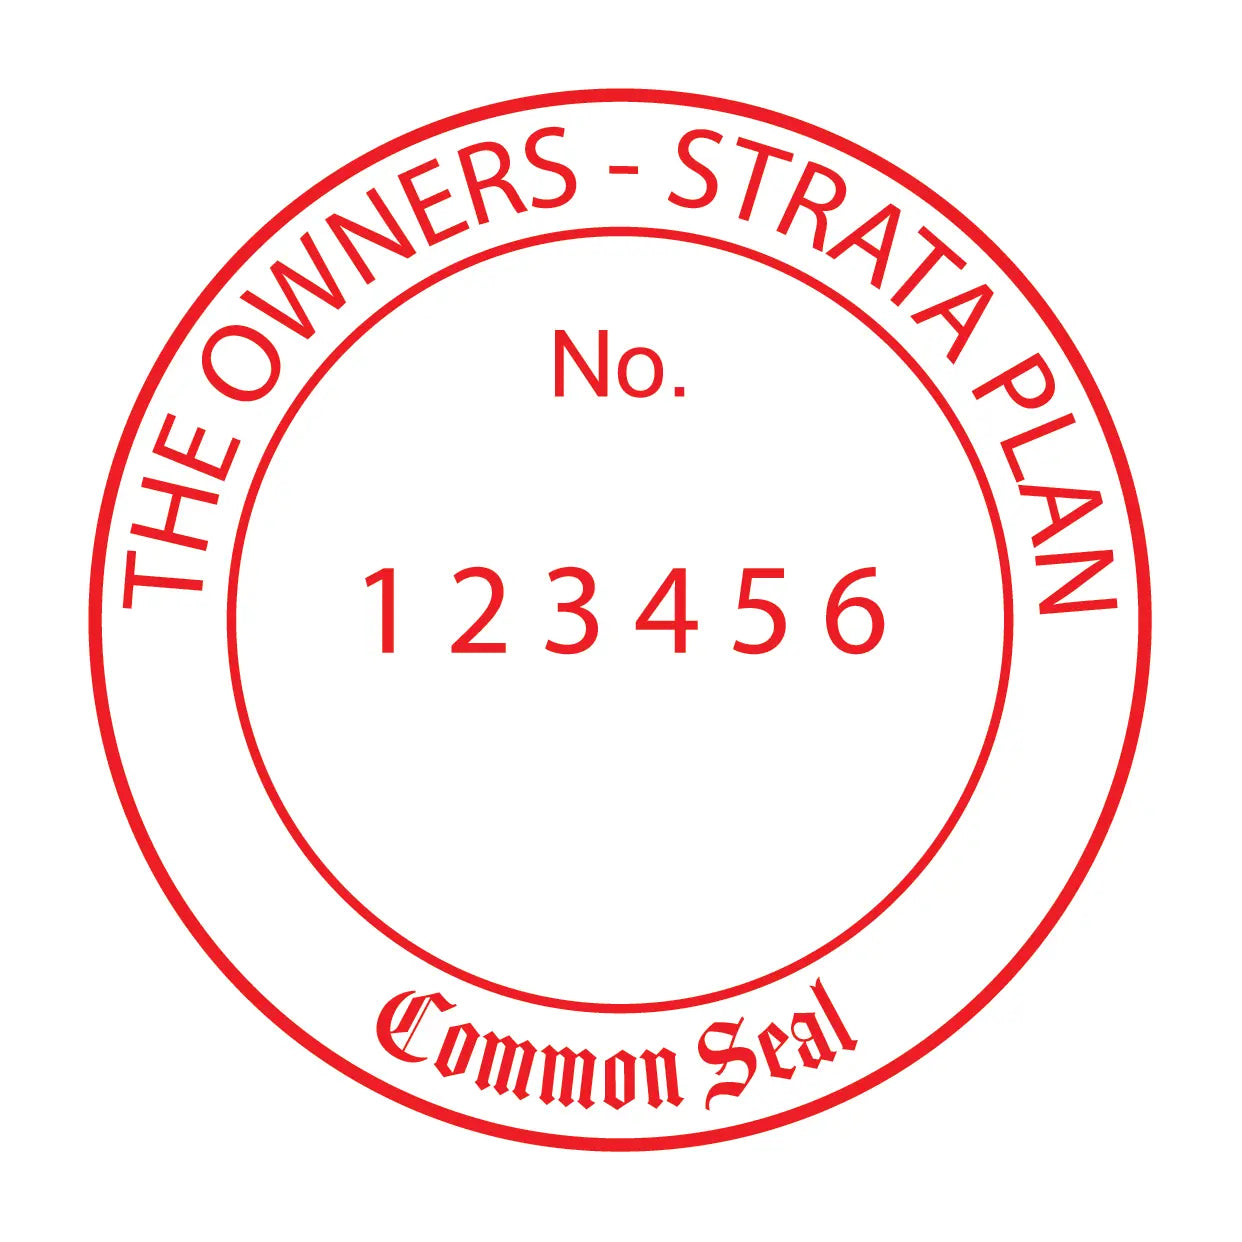 Custom Strata Common seal Stamp Red ink 